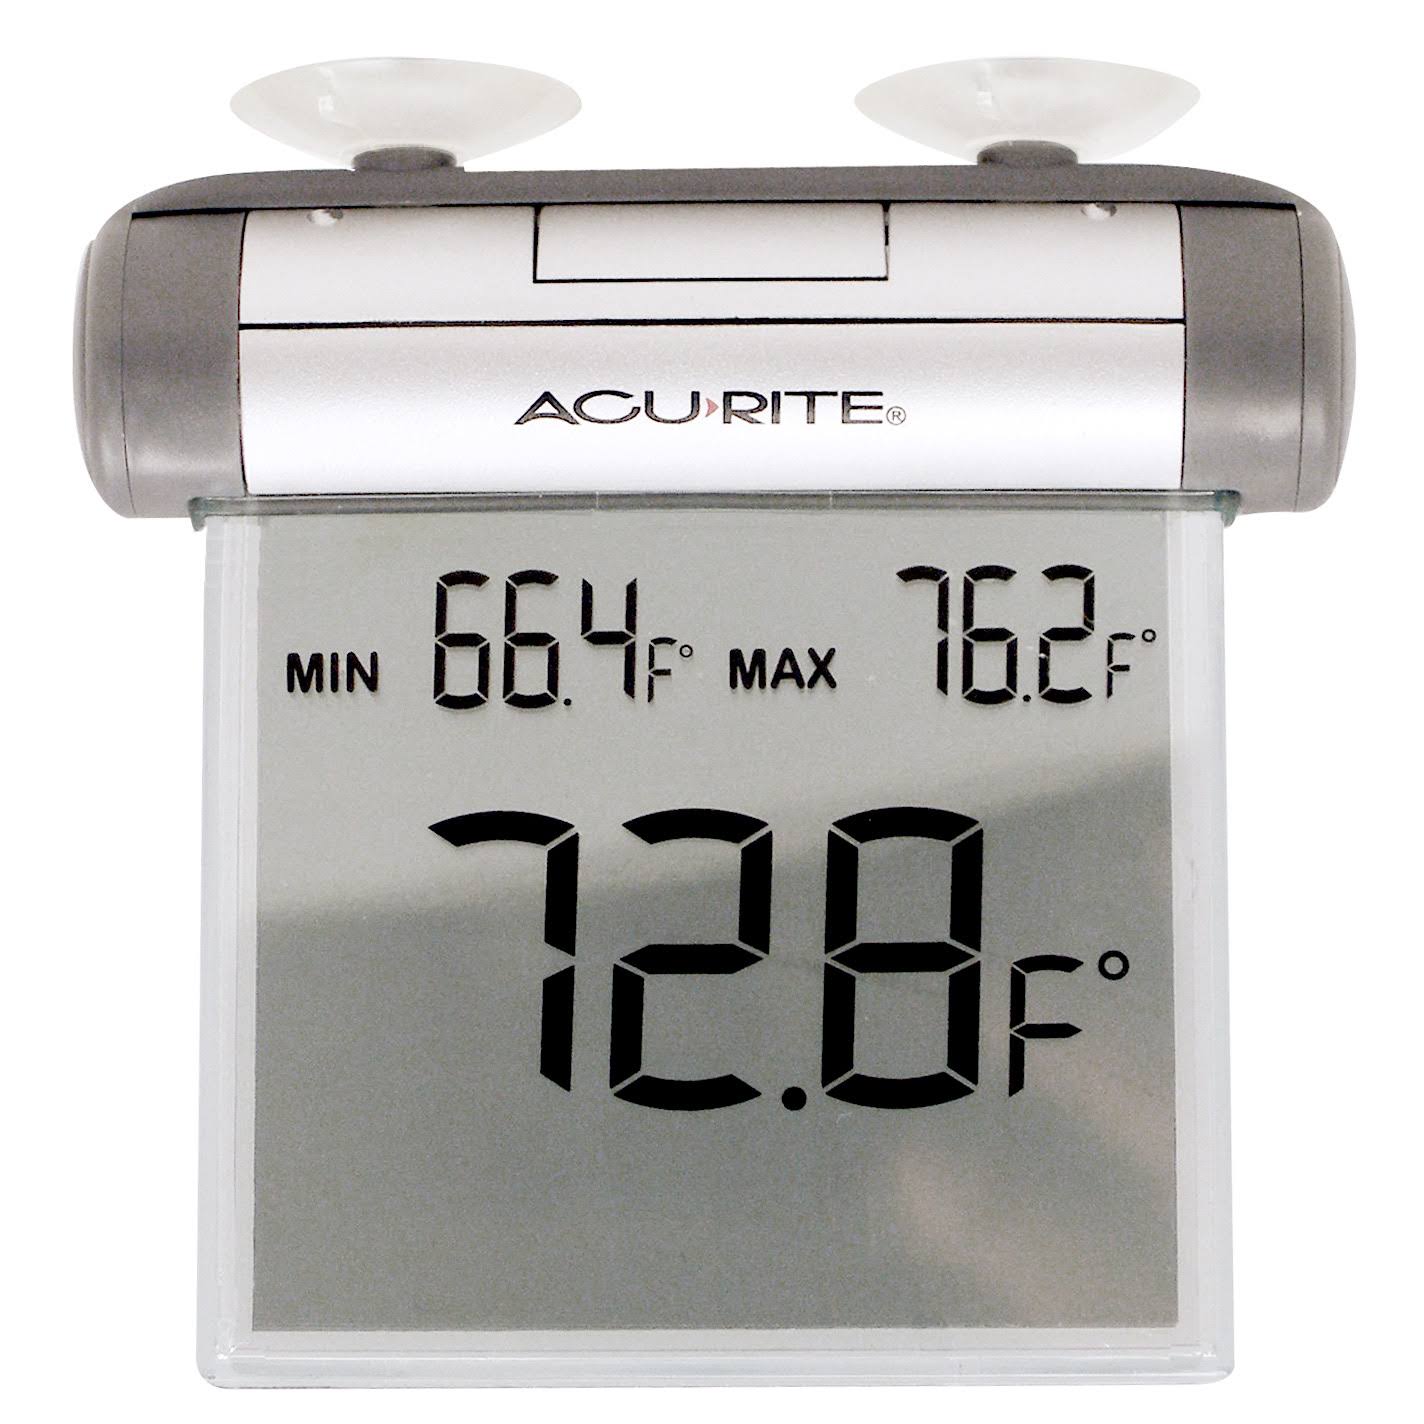 Acurite 00603a1 Digital Window Thermometer